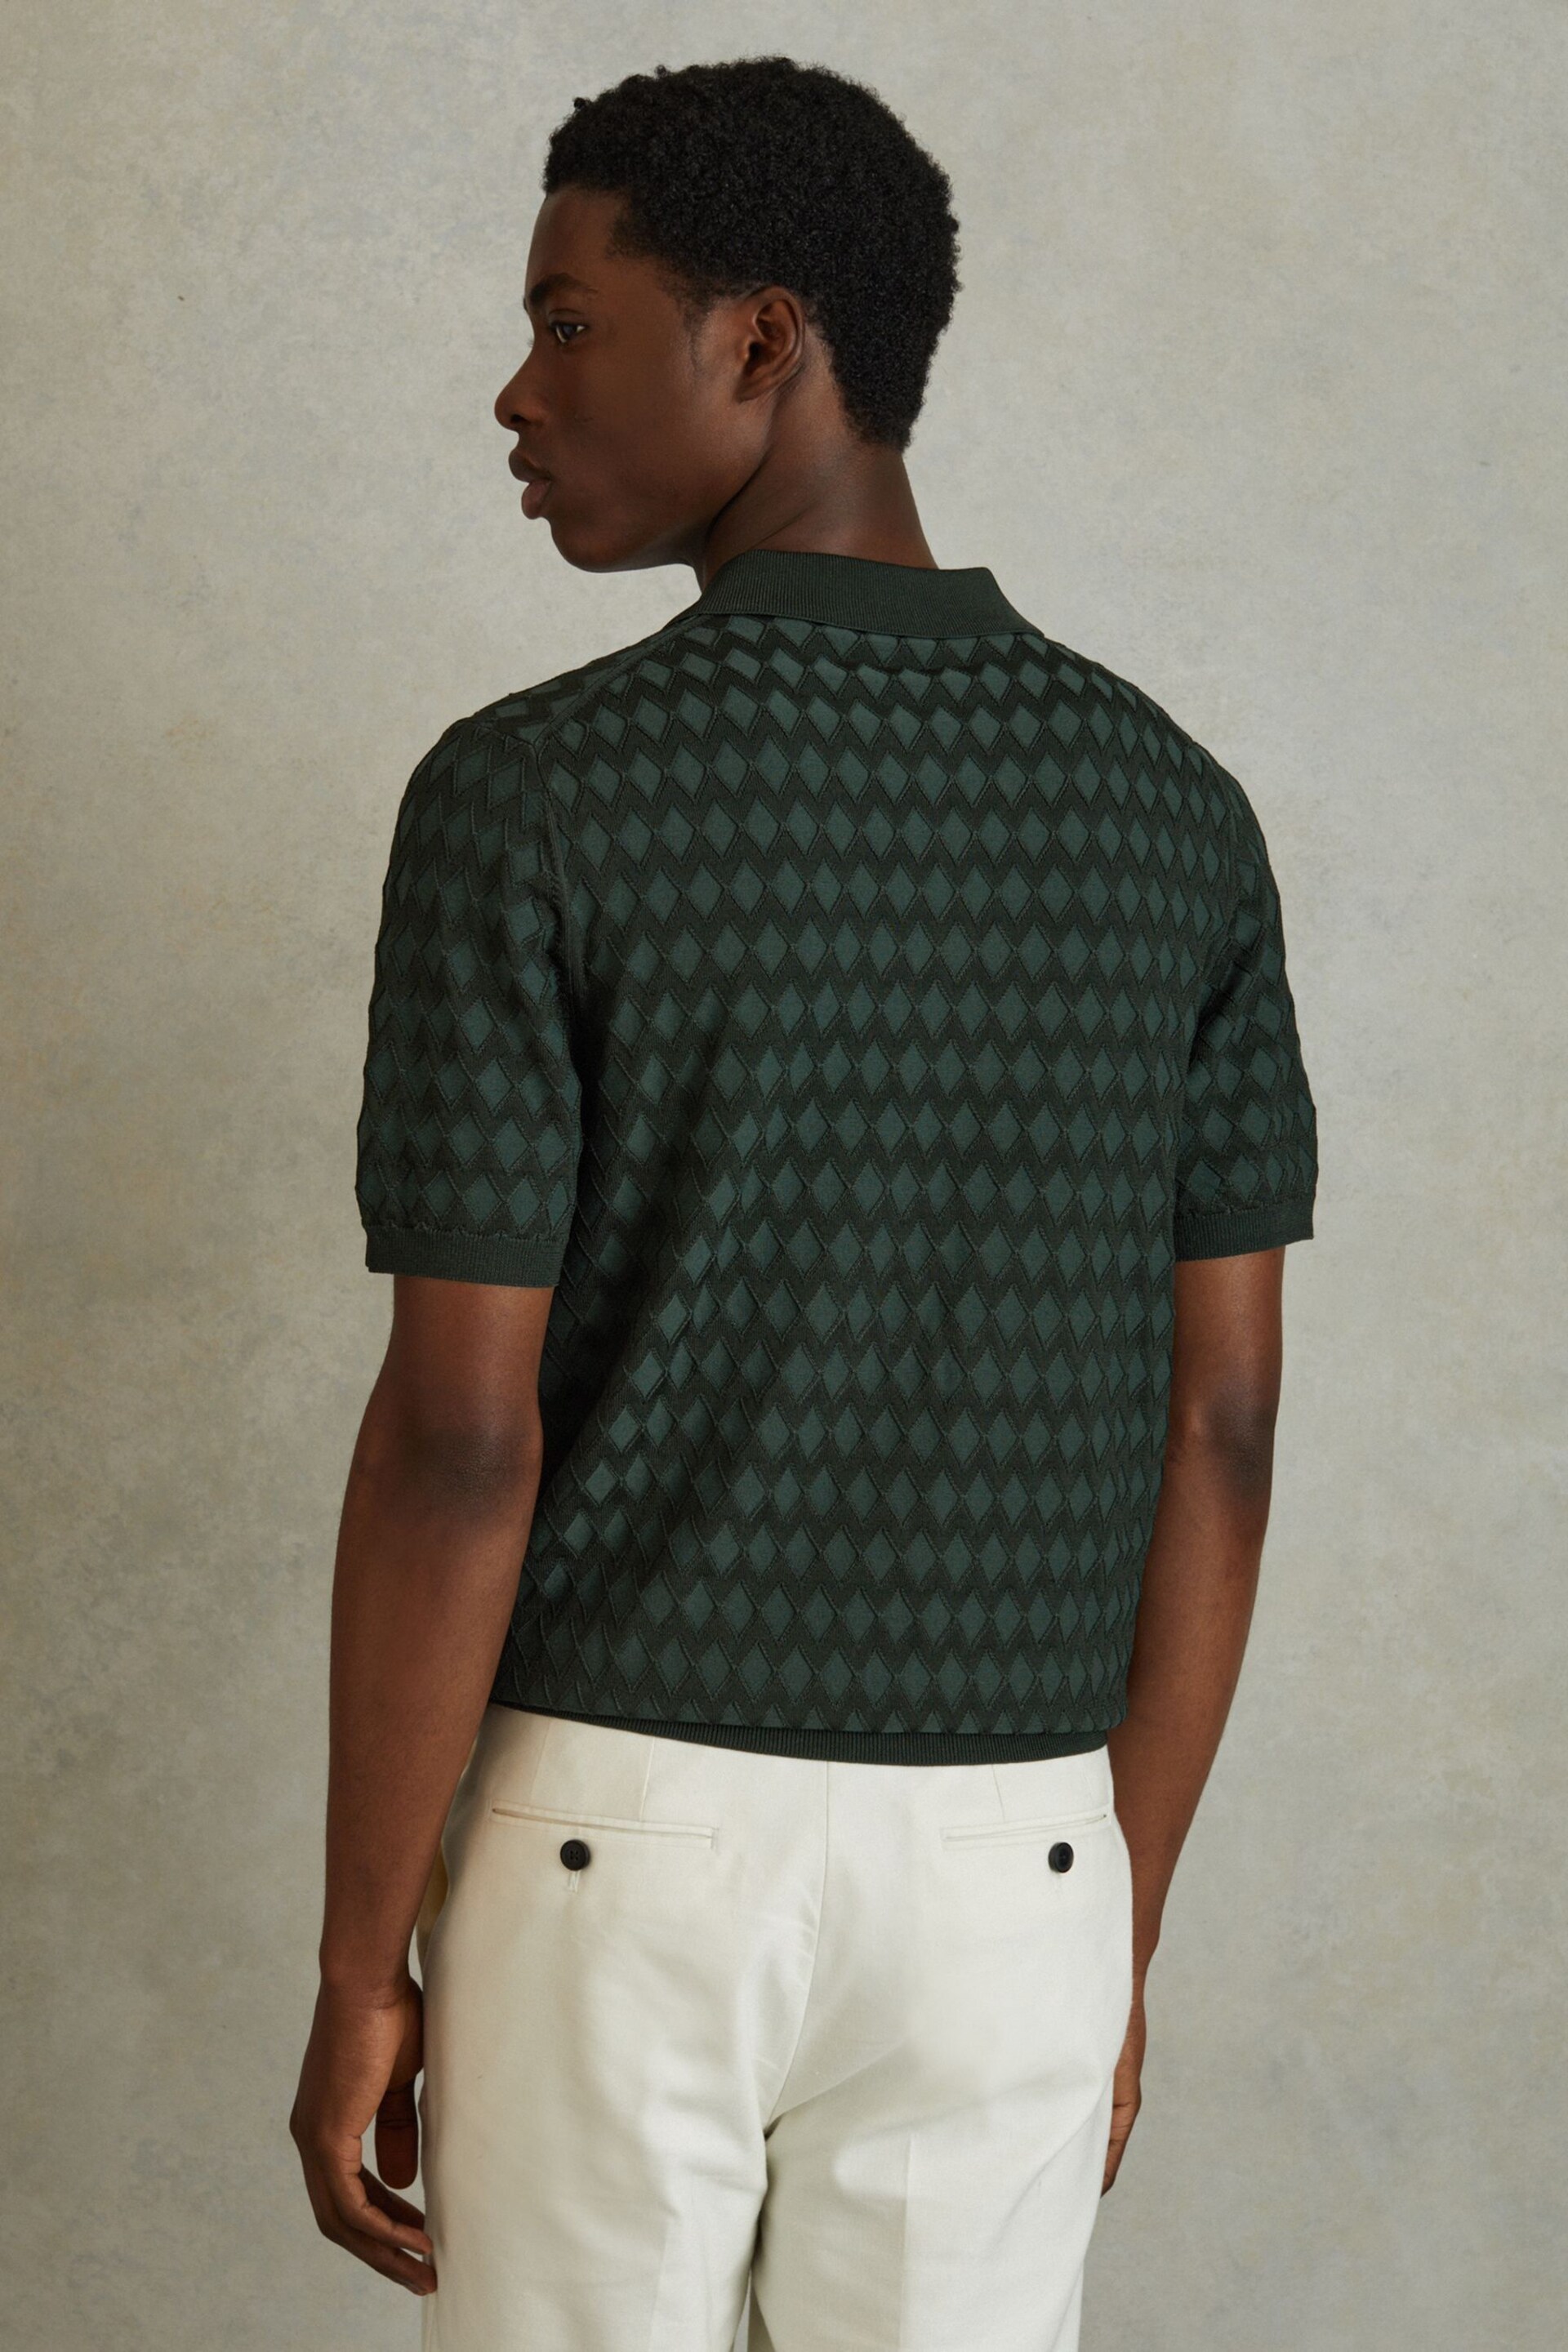 Reiss Emerald Rizzo Half-Zip Knitted Polo Shirt - Image 4 of 5